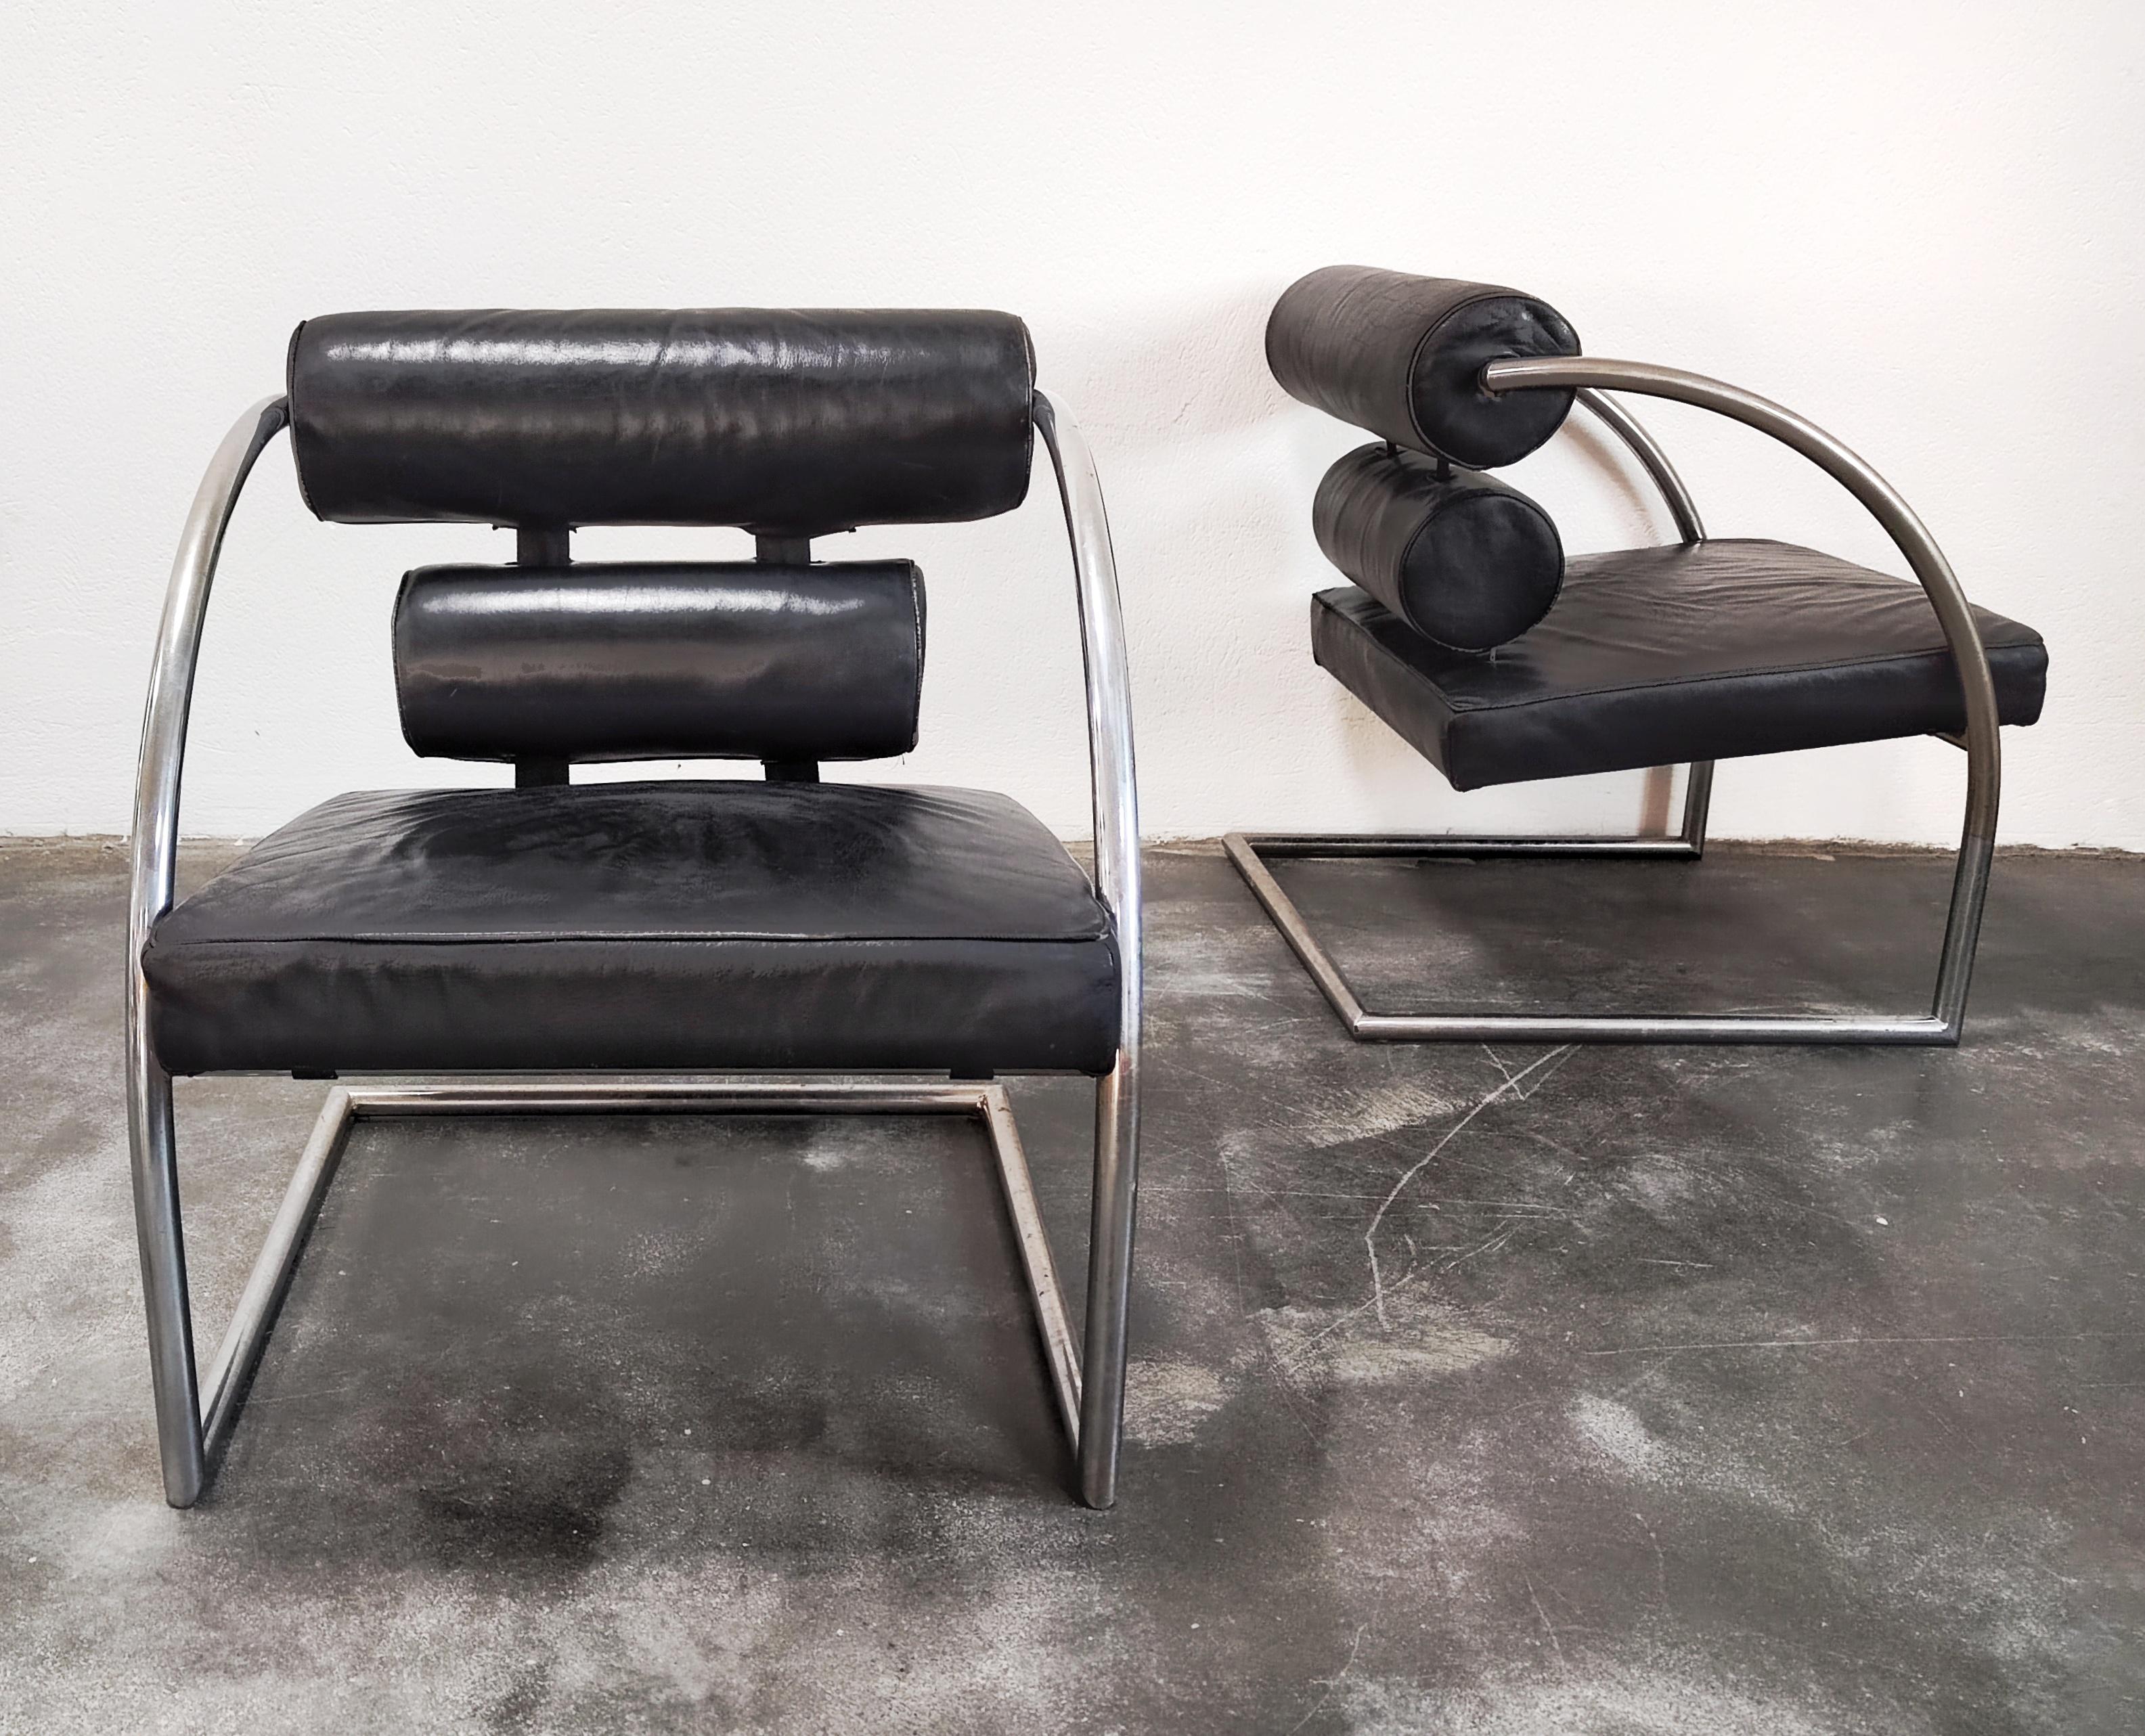 In this listing you will find a gorgeous, geometrical armchair done in leather, with tubular chrome frame. The armchair features the backrest with two cylinders and the square seat, creating harmonious design typical for the Bauhaus. Two armchairs